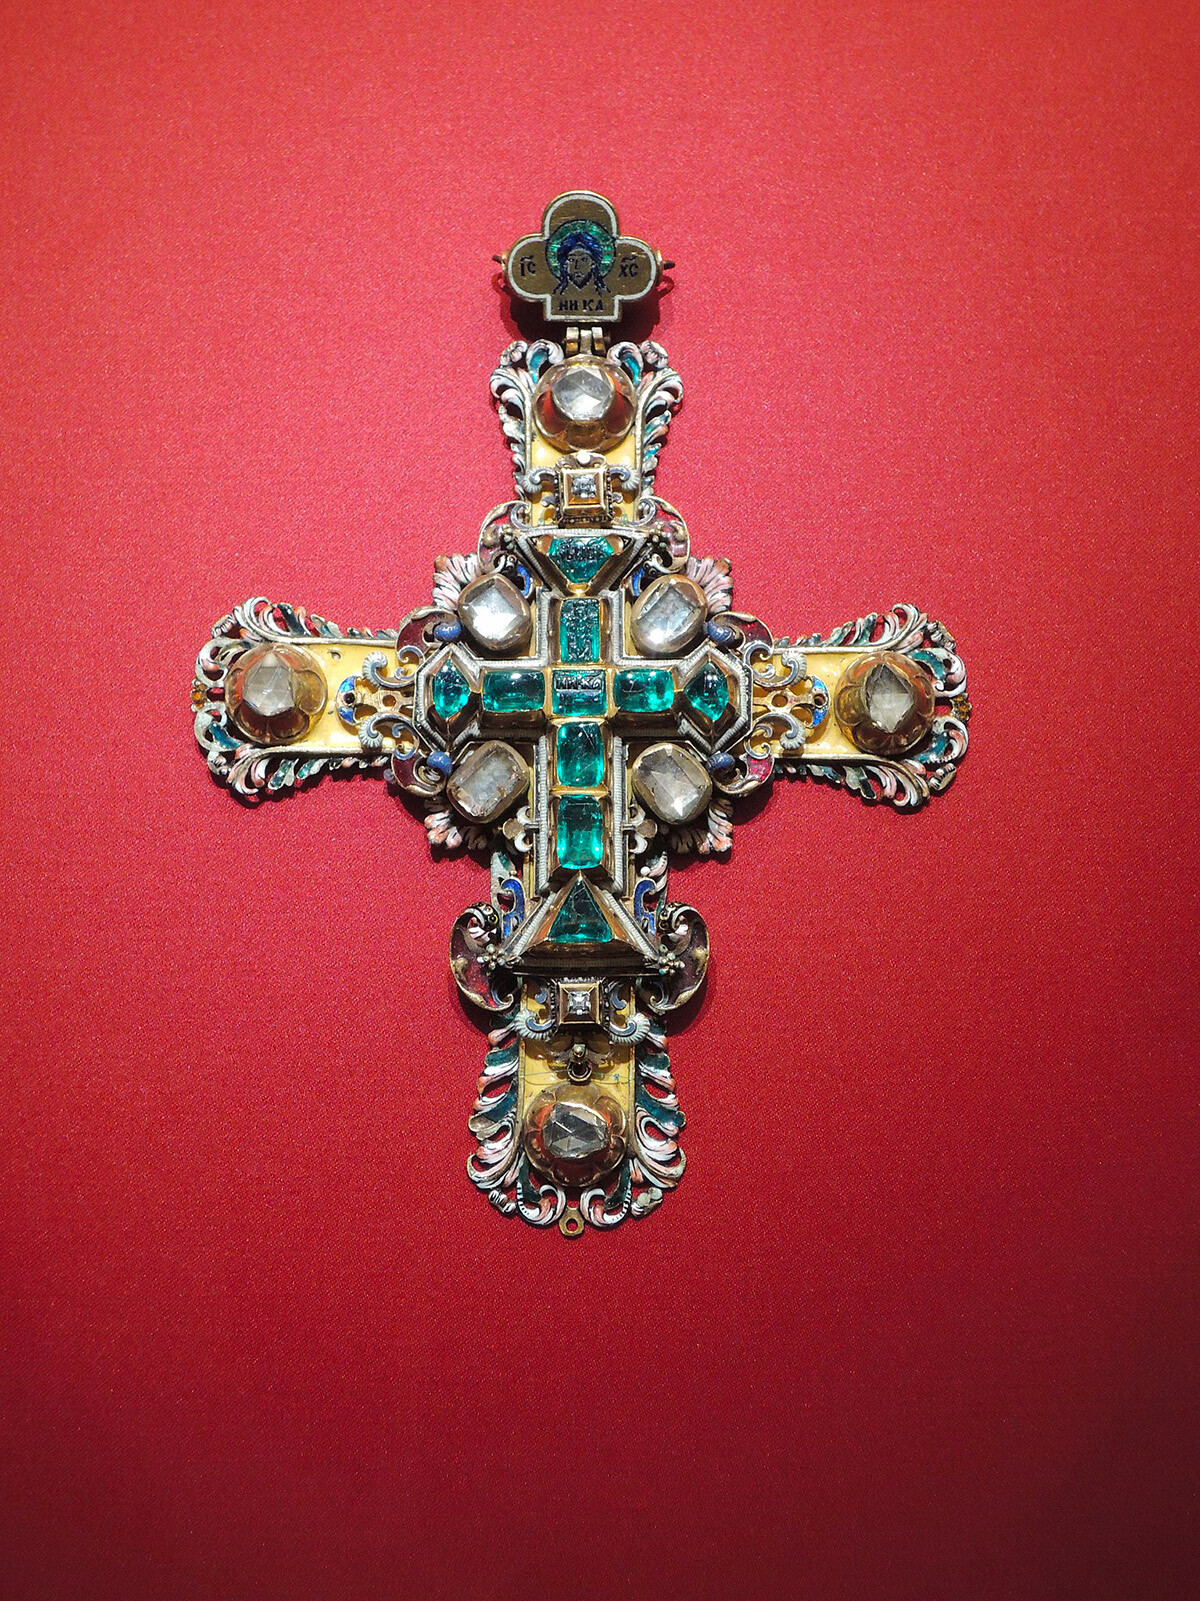 Pectoral cross of Peter the Great